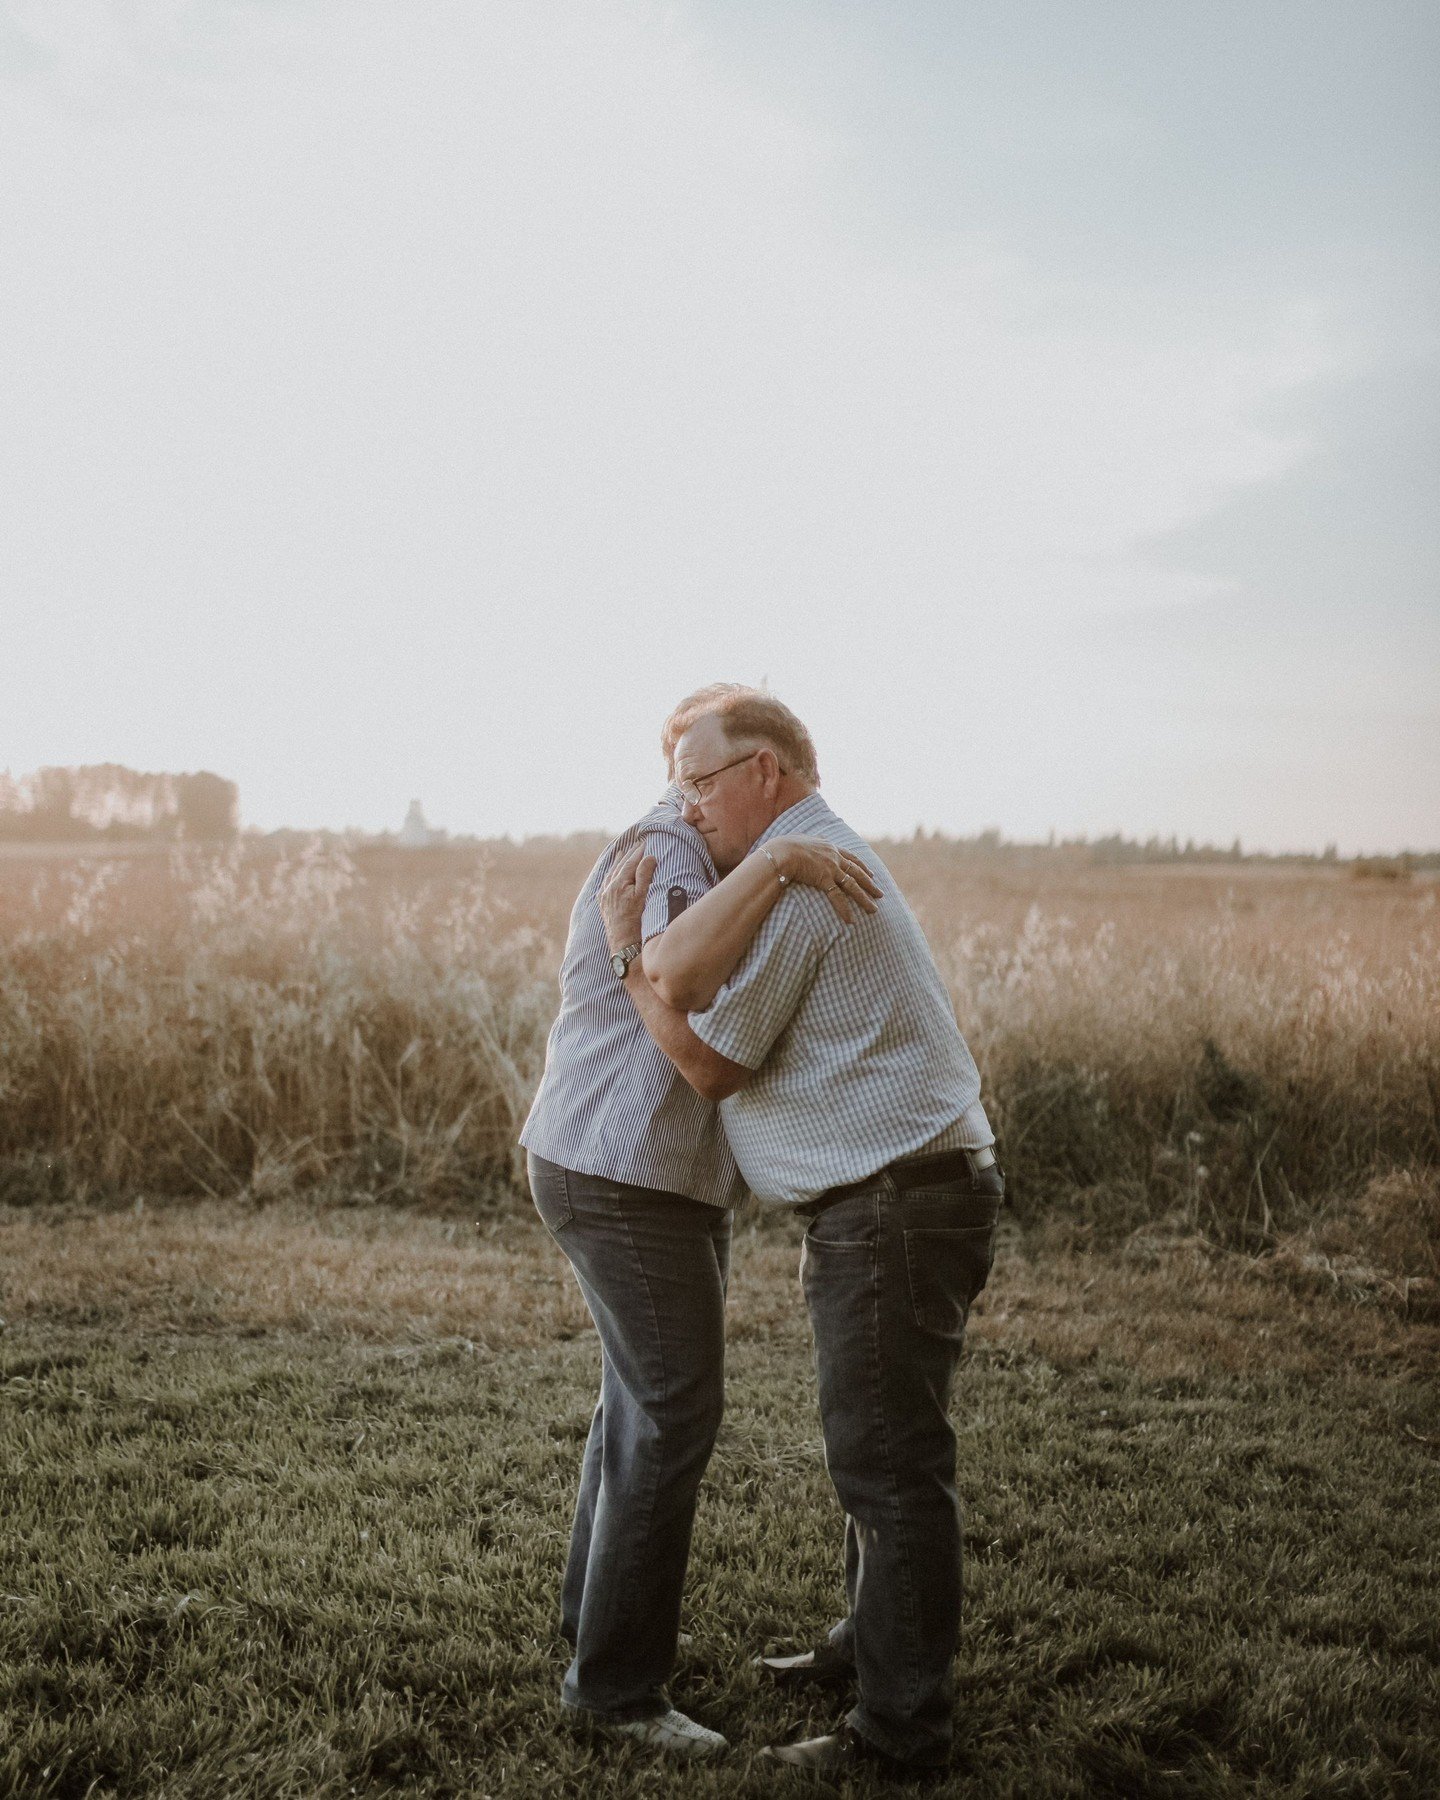 One of the most beautiful sessions I&rsquo;ve ever shot.  Dianne and Tom asked me to take their photo at the farm they fell in love with. They showed me around the property and told me stories of their lives. This moment was after they danced to thei